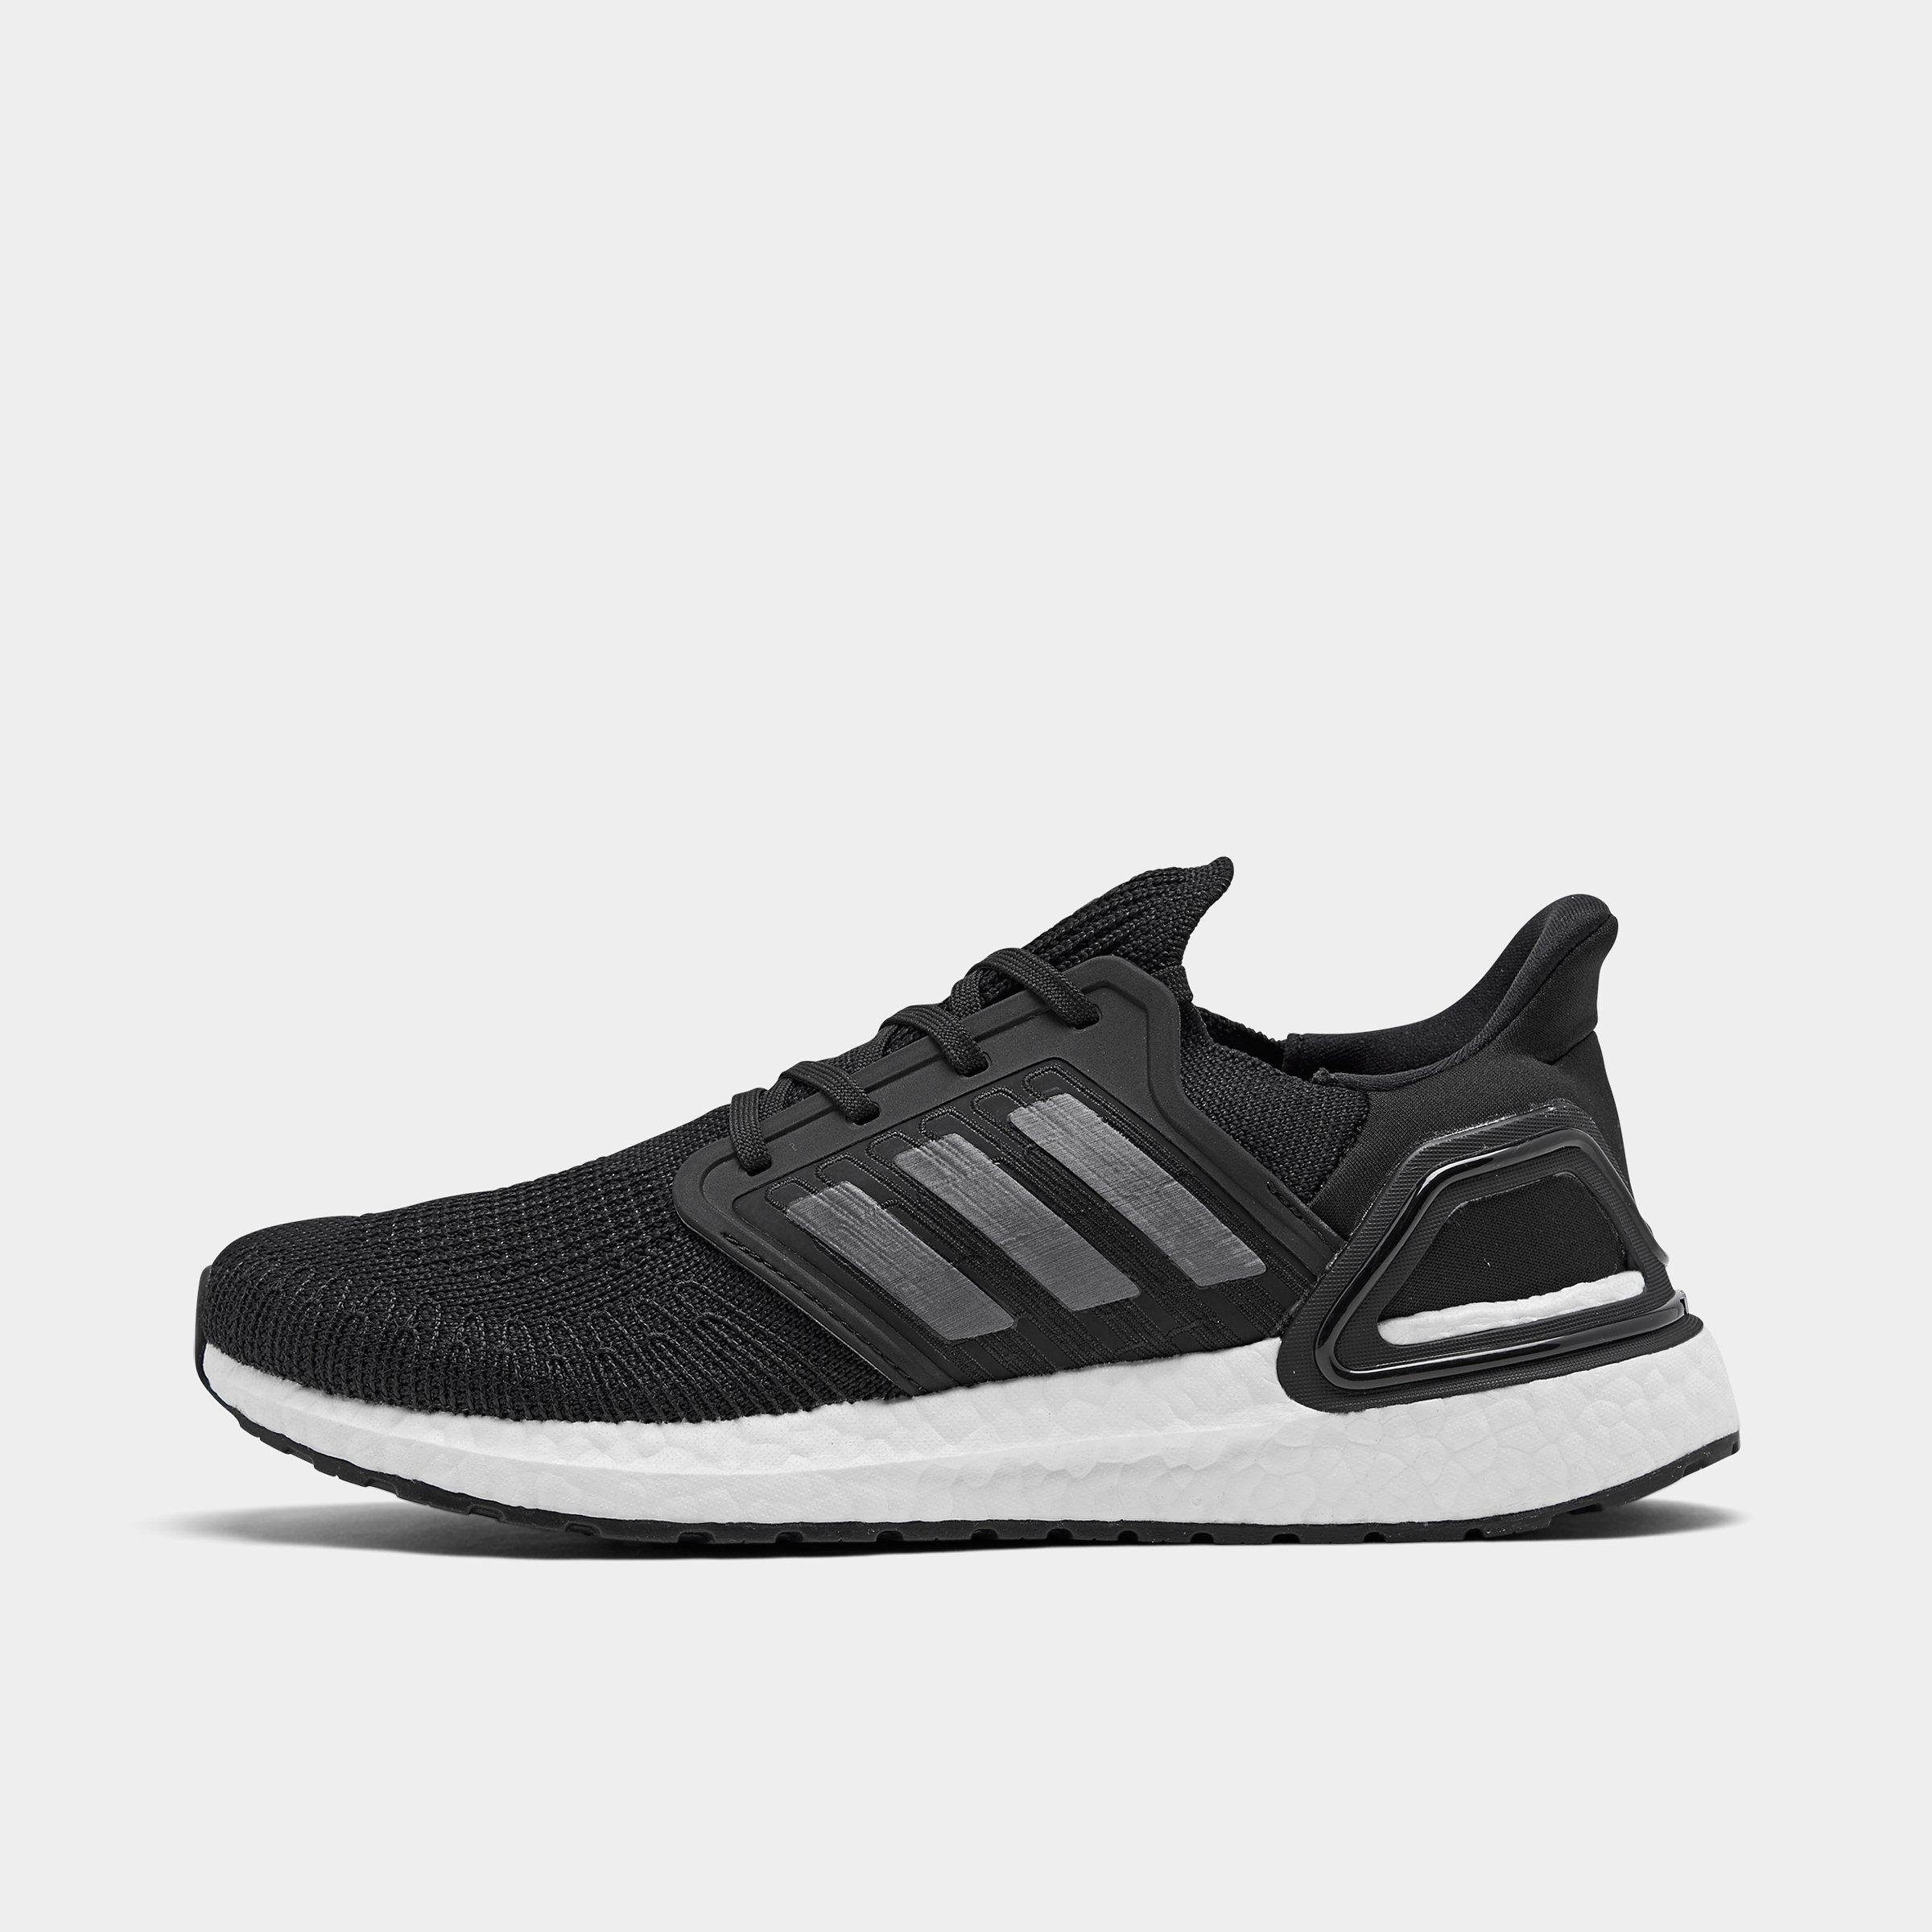 adidas shoes discount